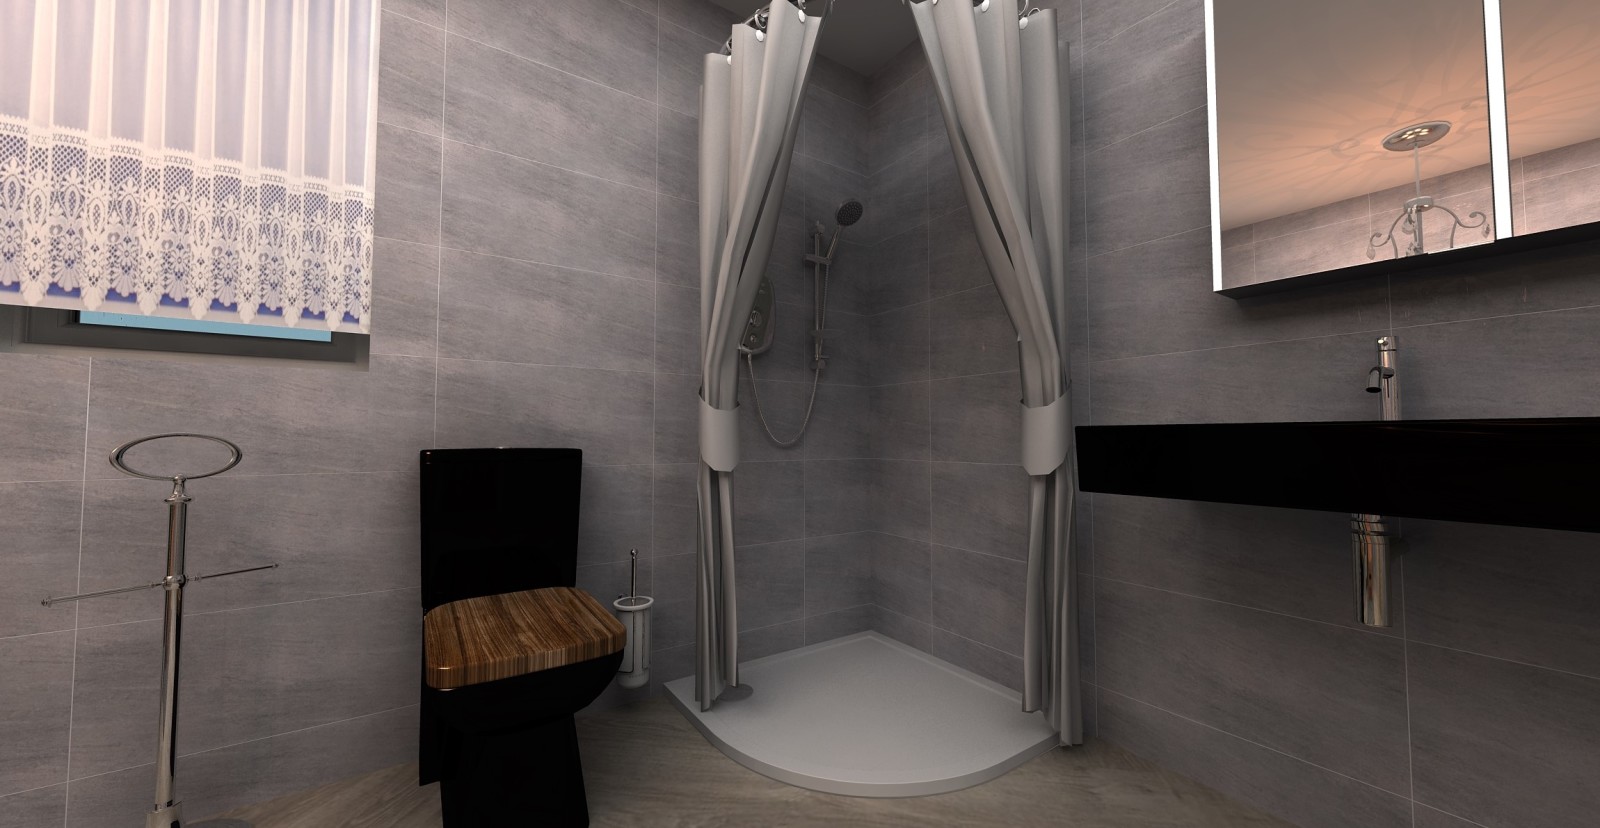 Digital lifestyle image of a bathroom designed using the Sanctuary Bathrooms' 3D design tool, featuring a freestanding double toilet roll holder, a matt black close coupled toilet, a wall mounted chrome toilet brush holder, a quadrant shower enclosure with grey shower curtains and a riser rail handset shower